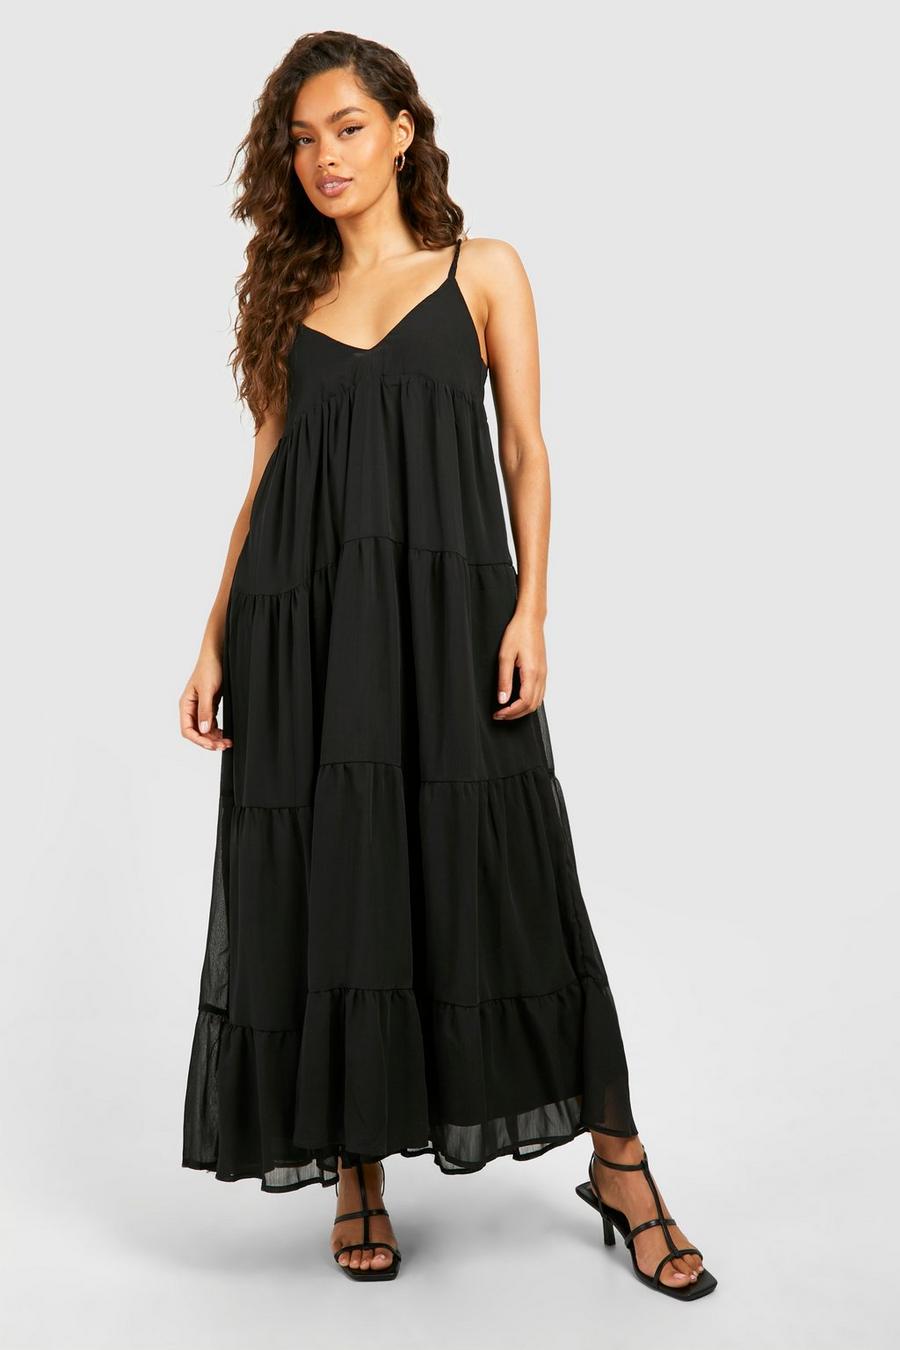 Black Chiffon Bead Strappy Tiered Midaxi Dress image number 1